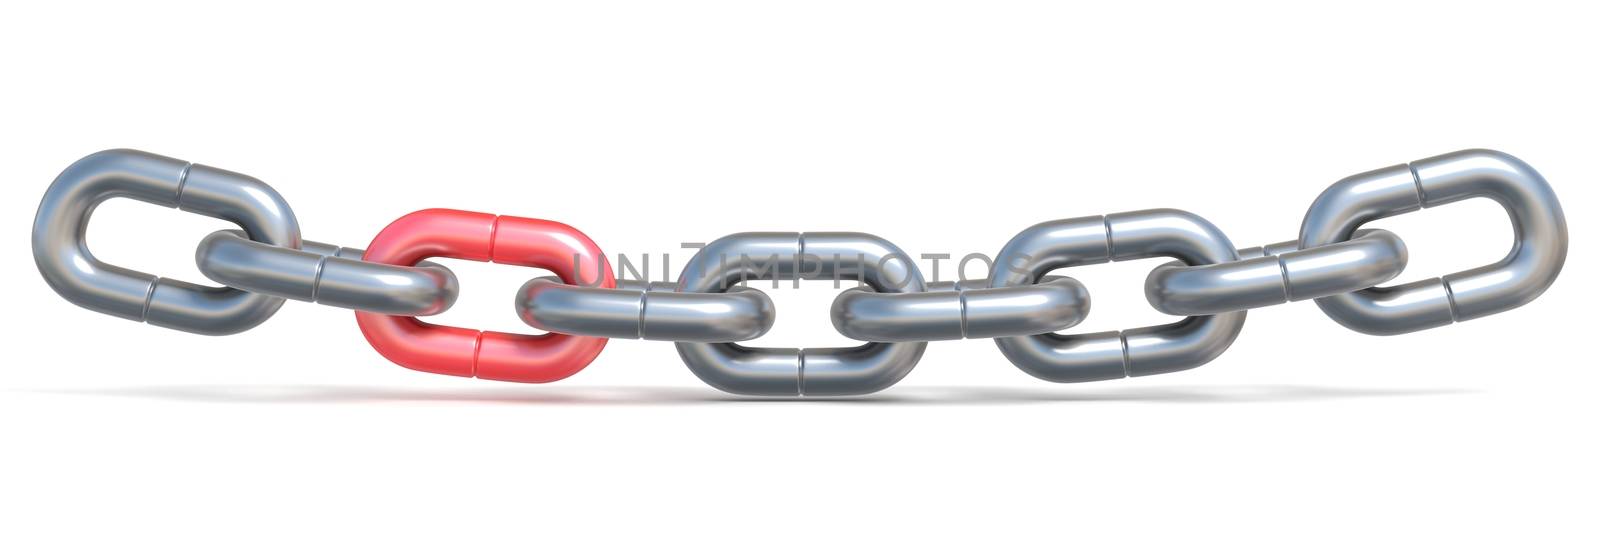 Chain with one red link 3D by djmilic